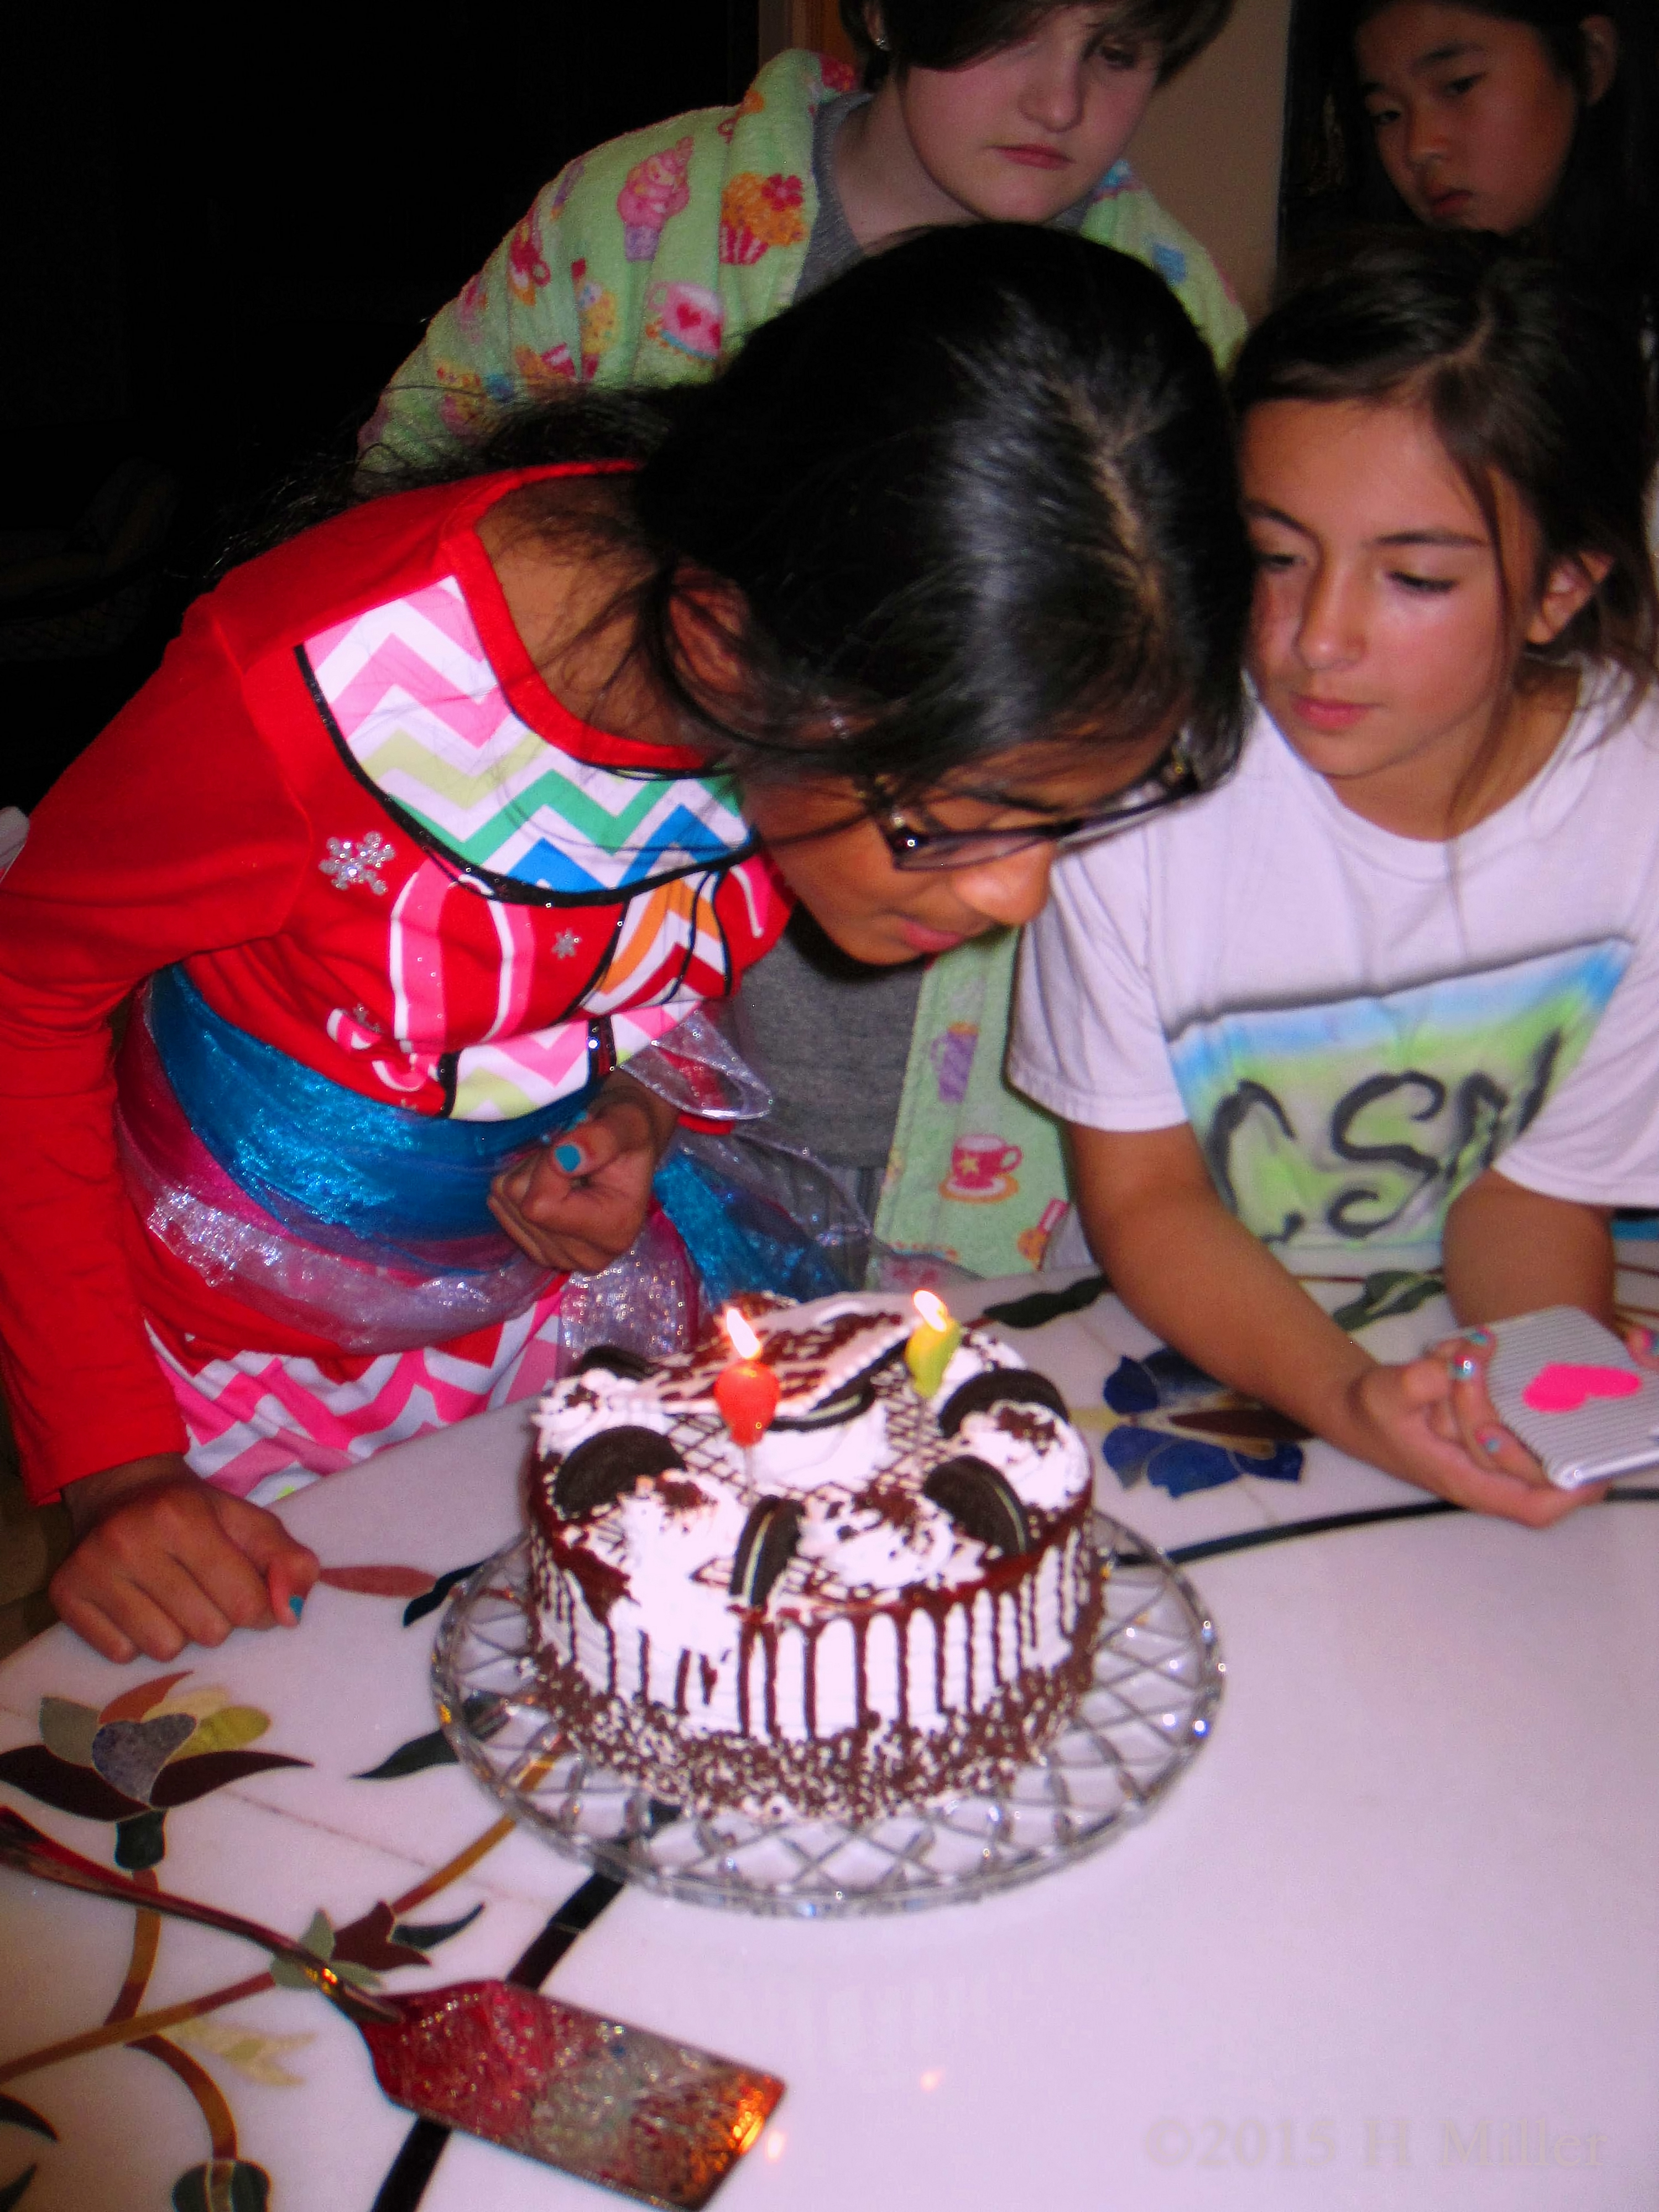 Blowing Out The Candles On Her Birthday Cake Now! 